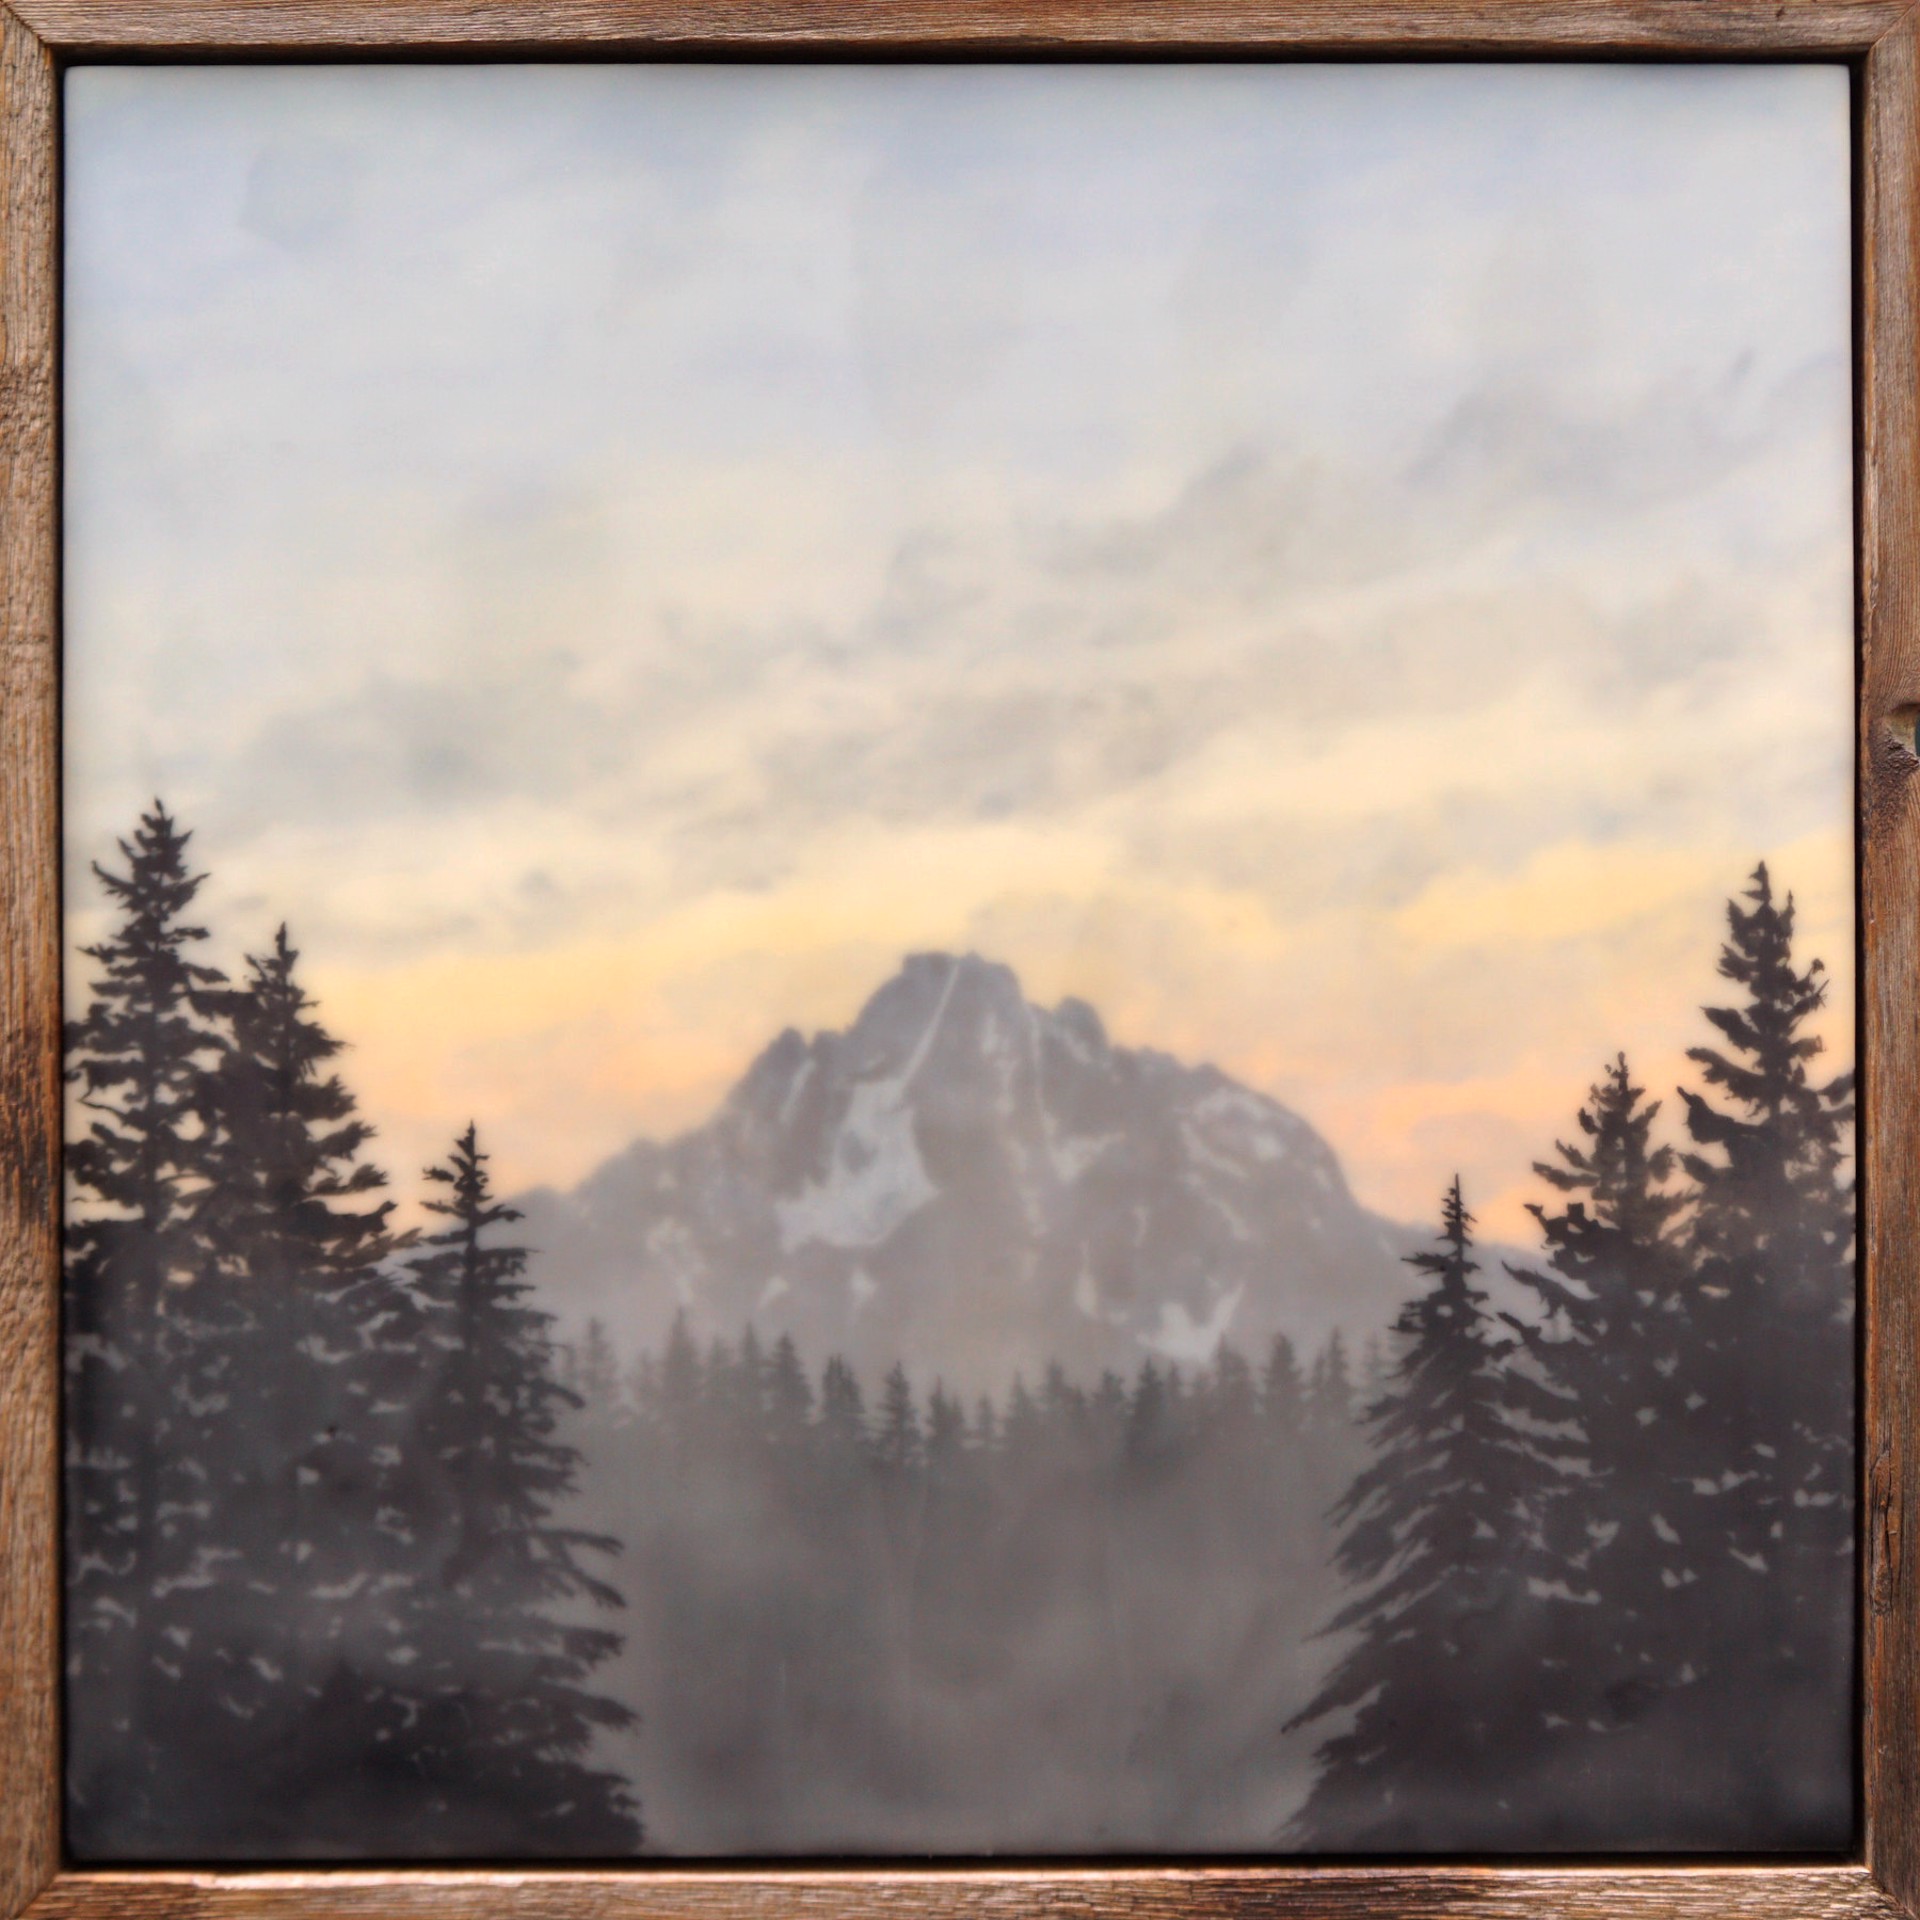 Mount Moran With A Soft Warm Pink To Yellow Sky Framed By Evergreen Ridges